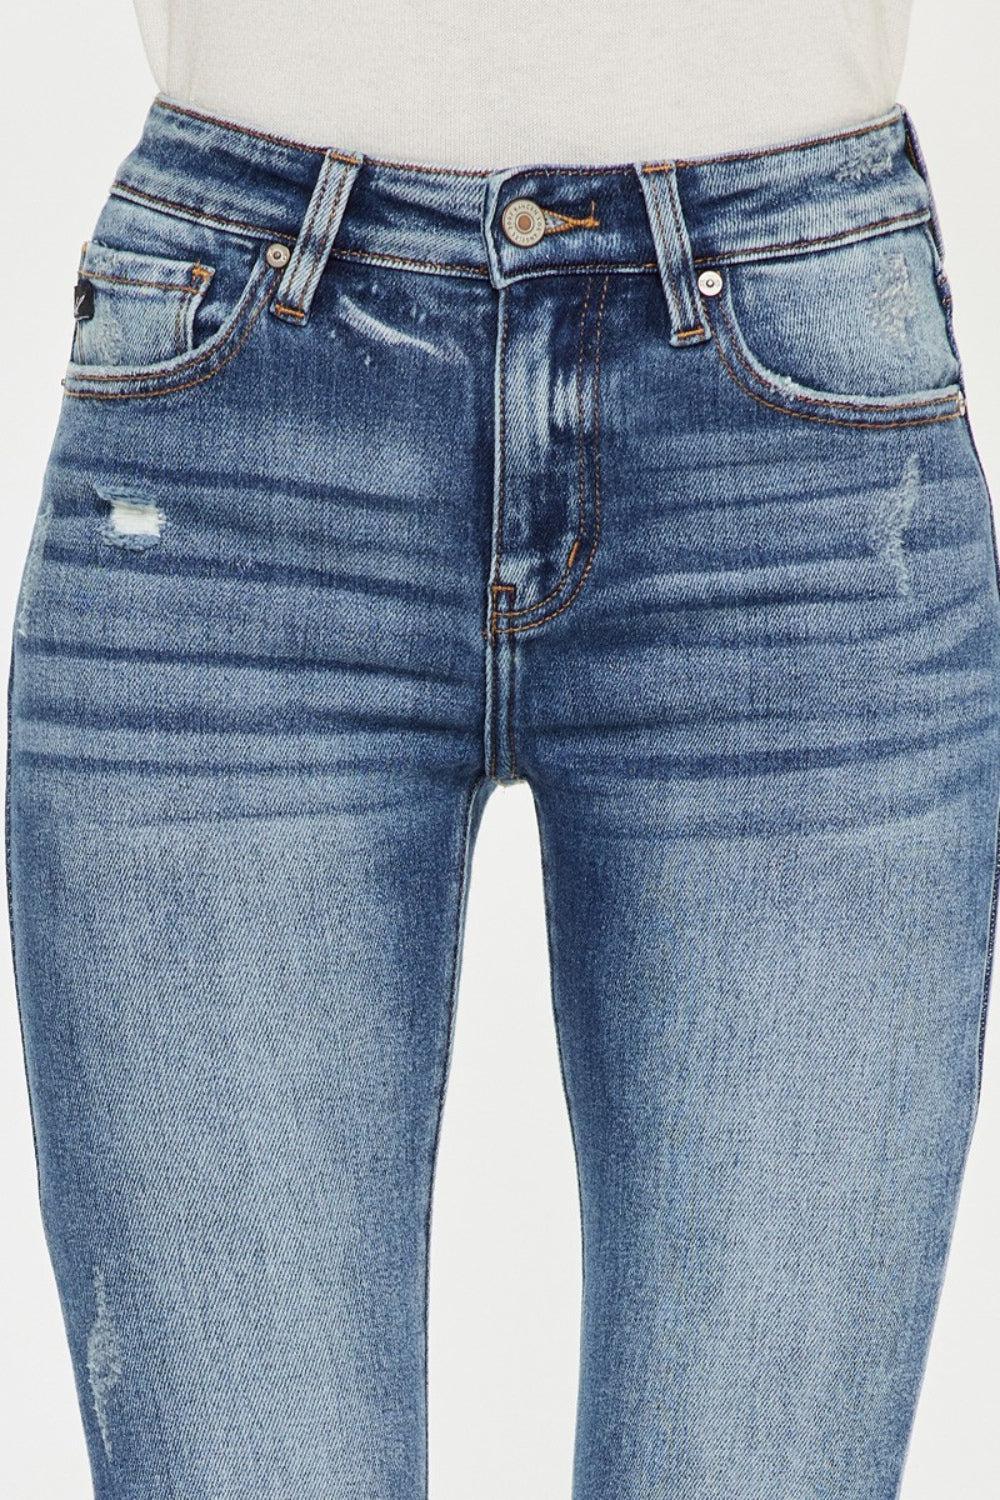 a pair of jeans with holes on the side